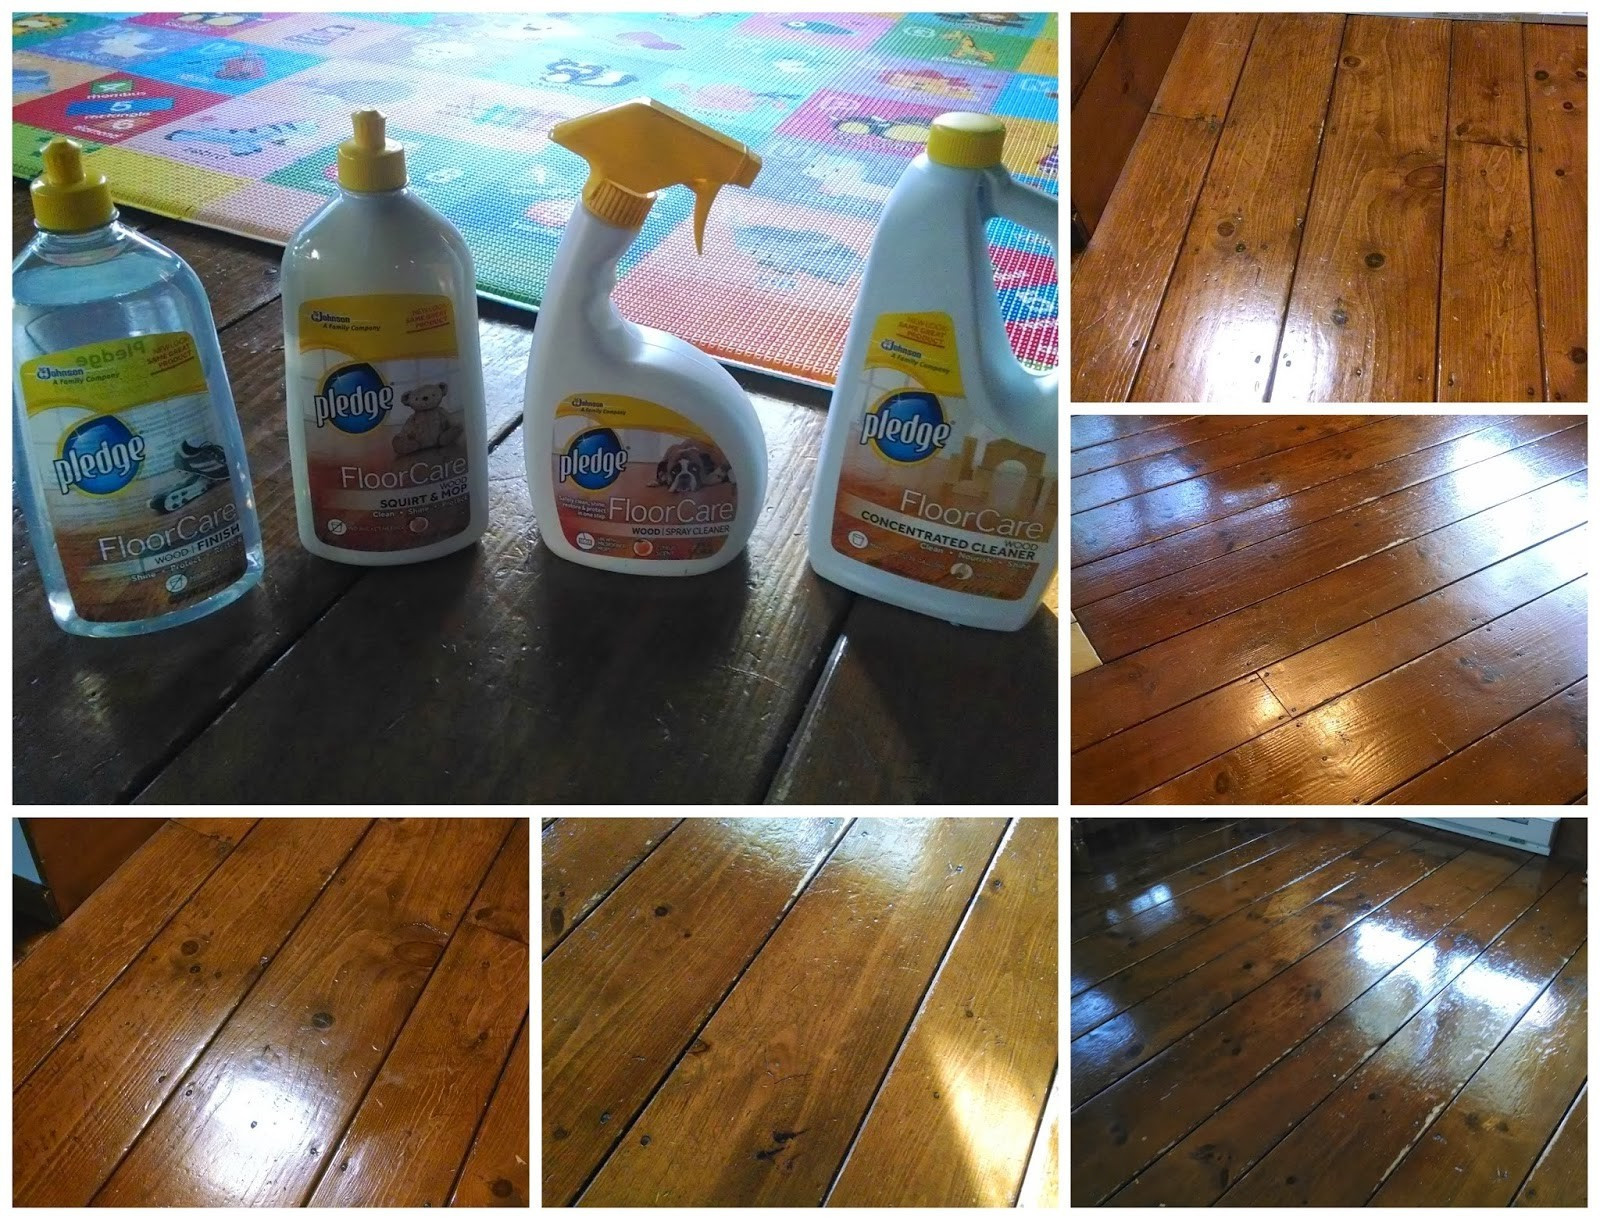 bruce hardwood floor cleaning products of 17 awesome what to use to clean hardwood floors image dizpos com within what to use to clean hardwood floors fresh 24 best pics best ways to clean hardwood